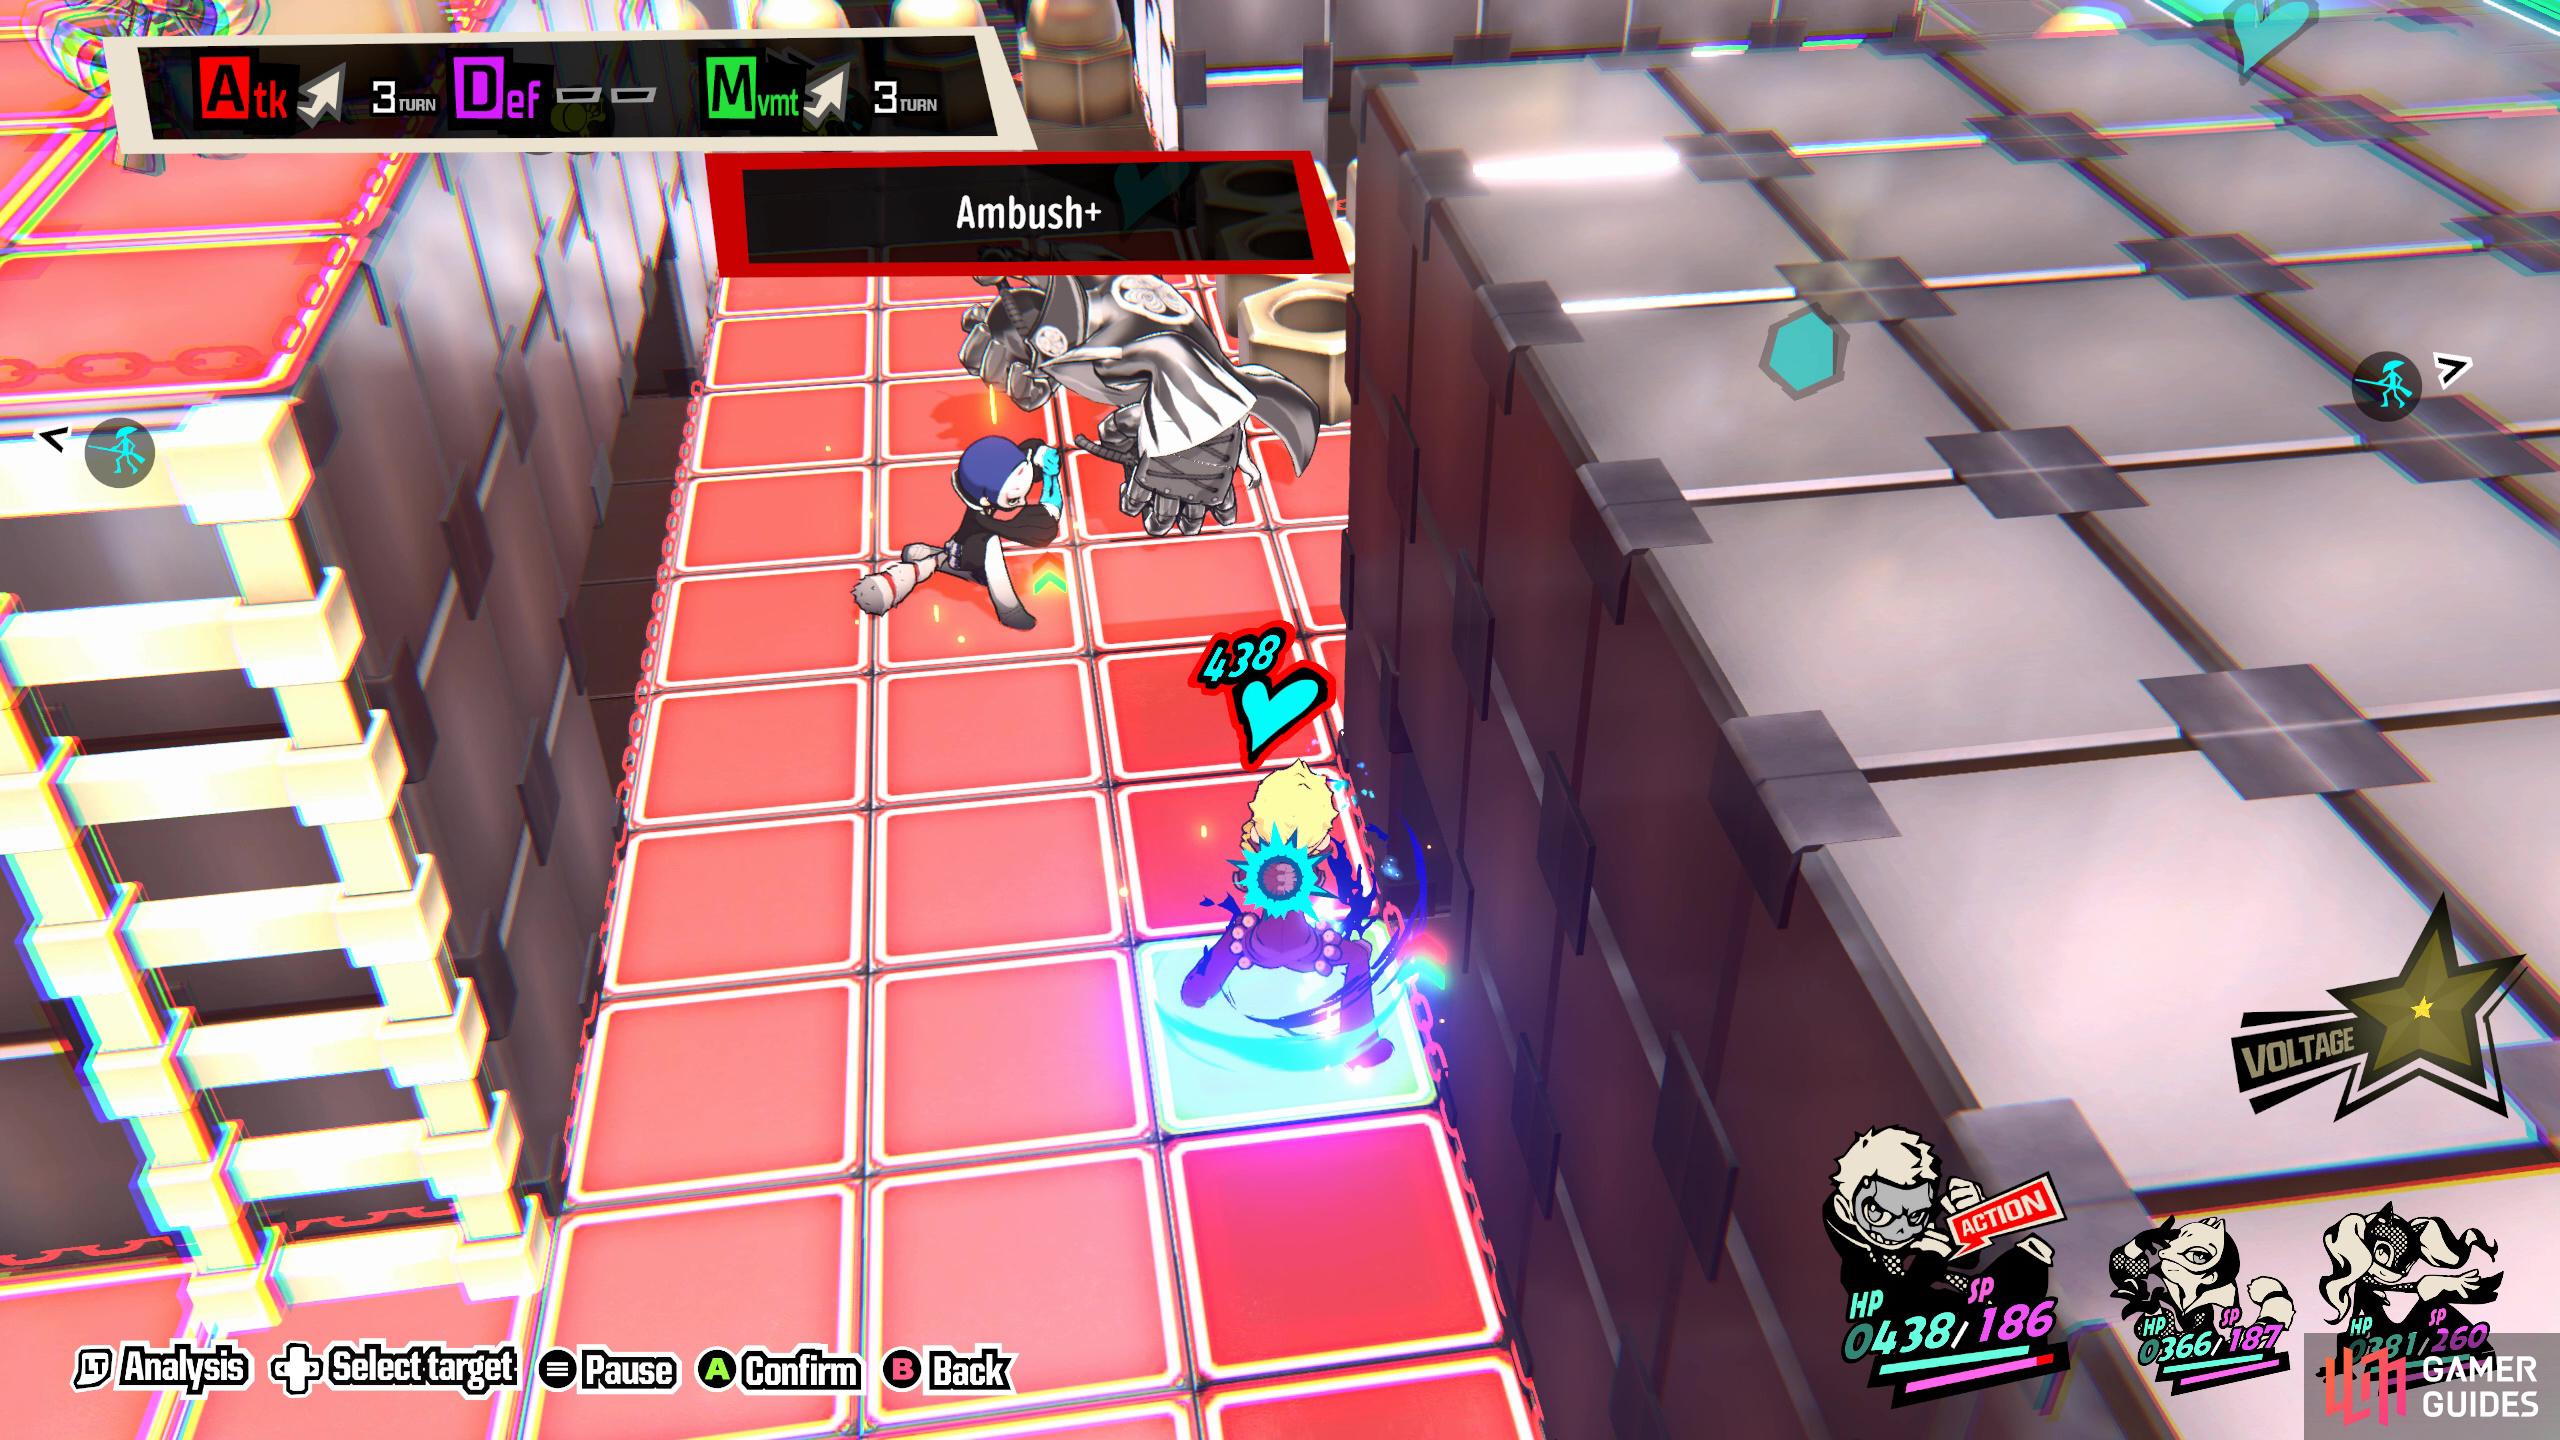 Step 3: Switch to Ryuji, go down the ladder, and wait in cover near Yusuke. If you have Ambush, put it on Yusuke.